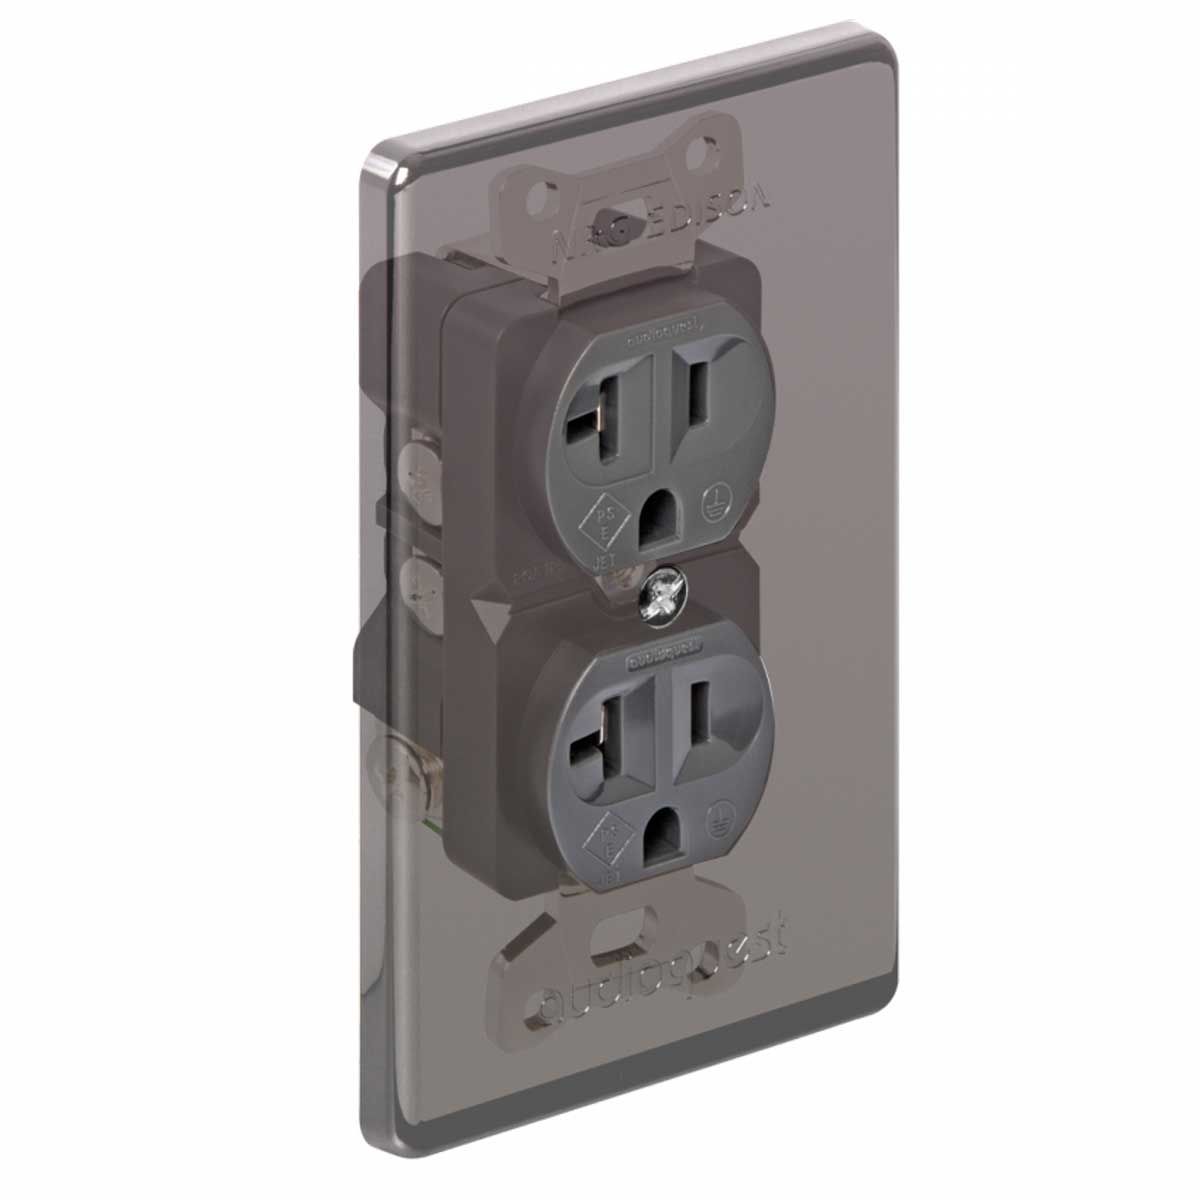 AudioQuest NRG Edison Duplex Wall Outlet front view with cover